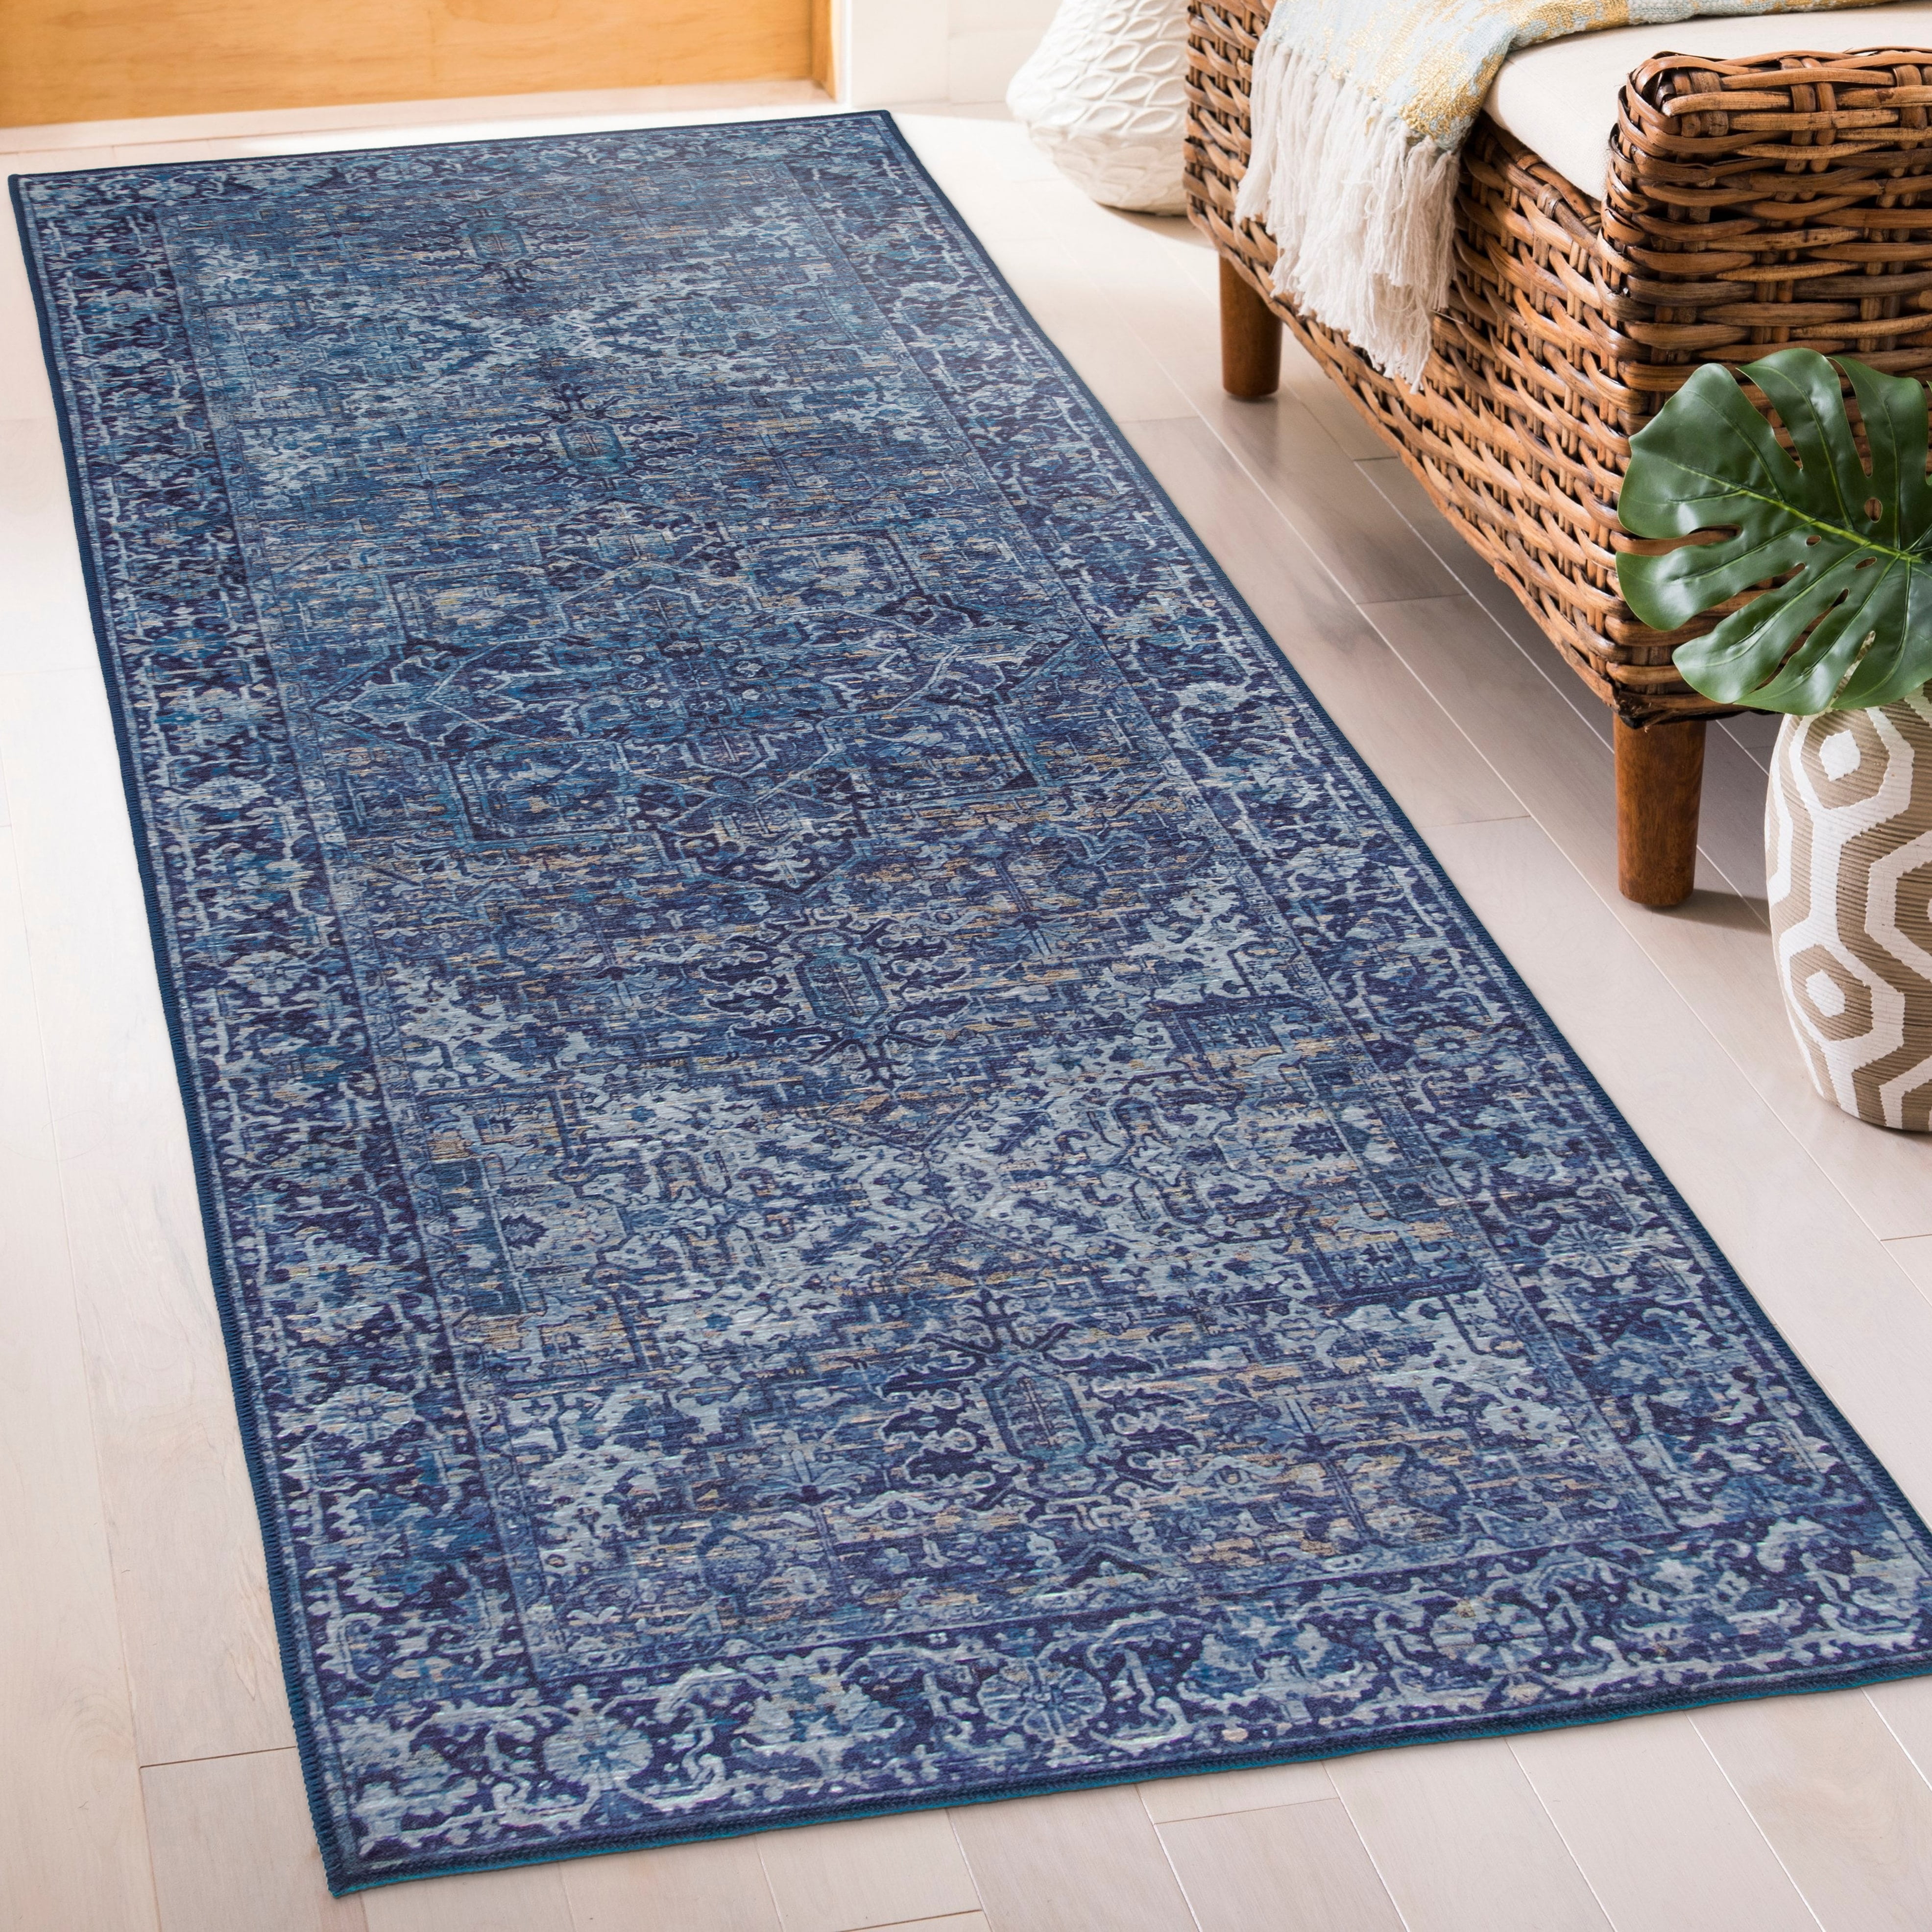 Traditional Distressed Teal Blue Grey Rug Low Pile Durable for Busy Home Runners 